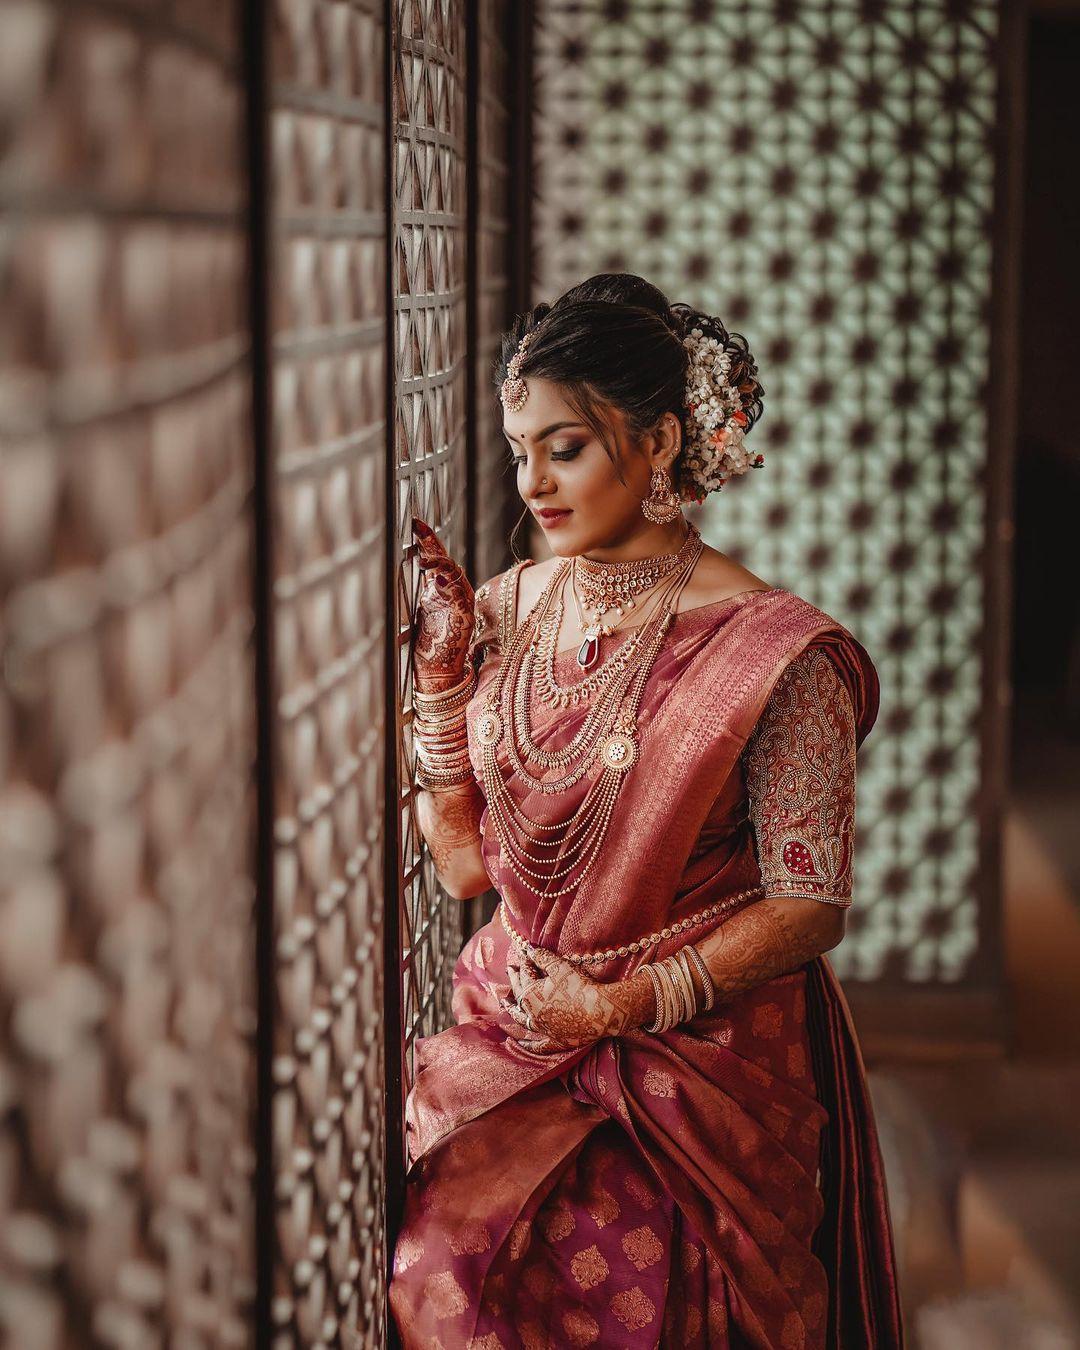 South Indian bride | Indian bridal fashion, South indian bride saree,  Indian bride poses